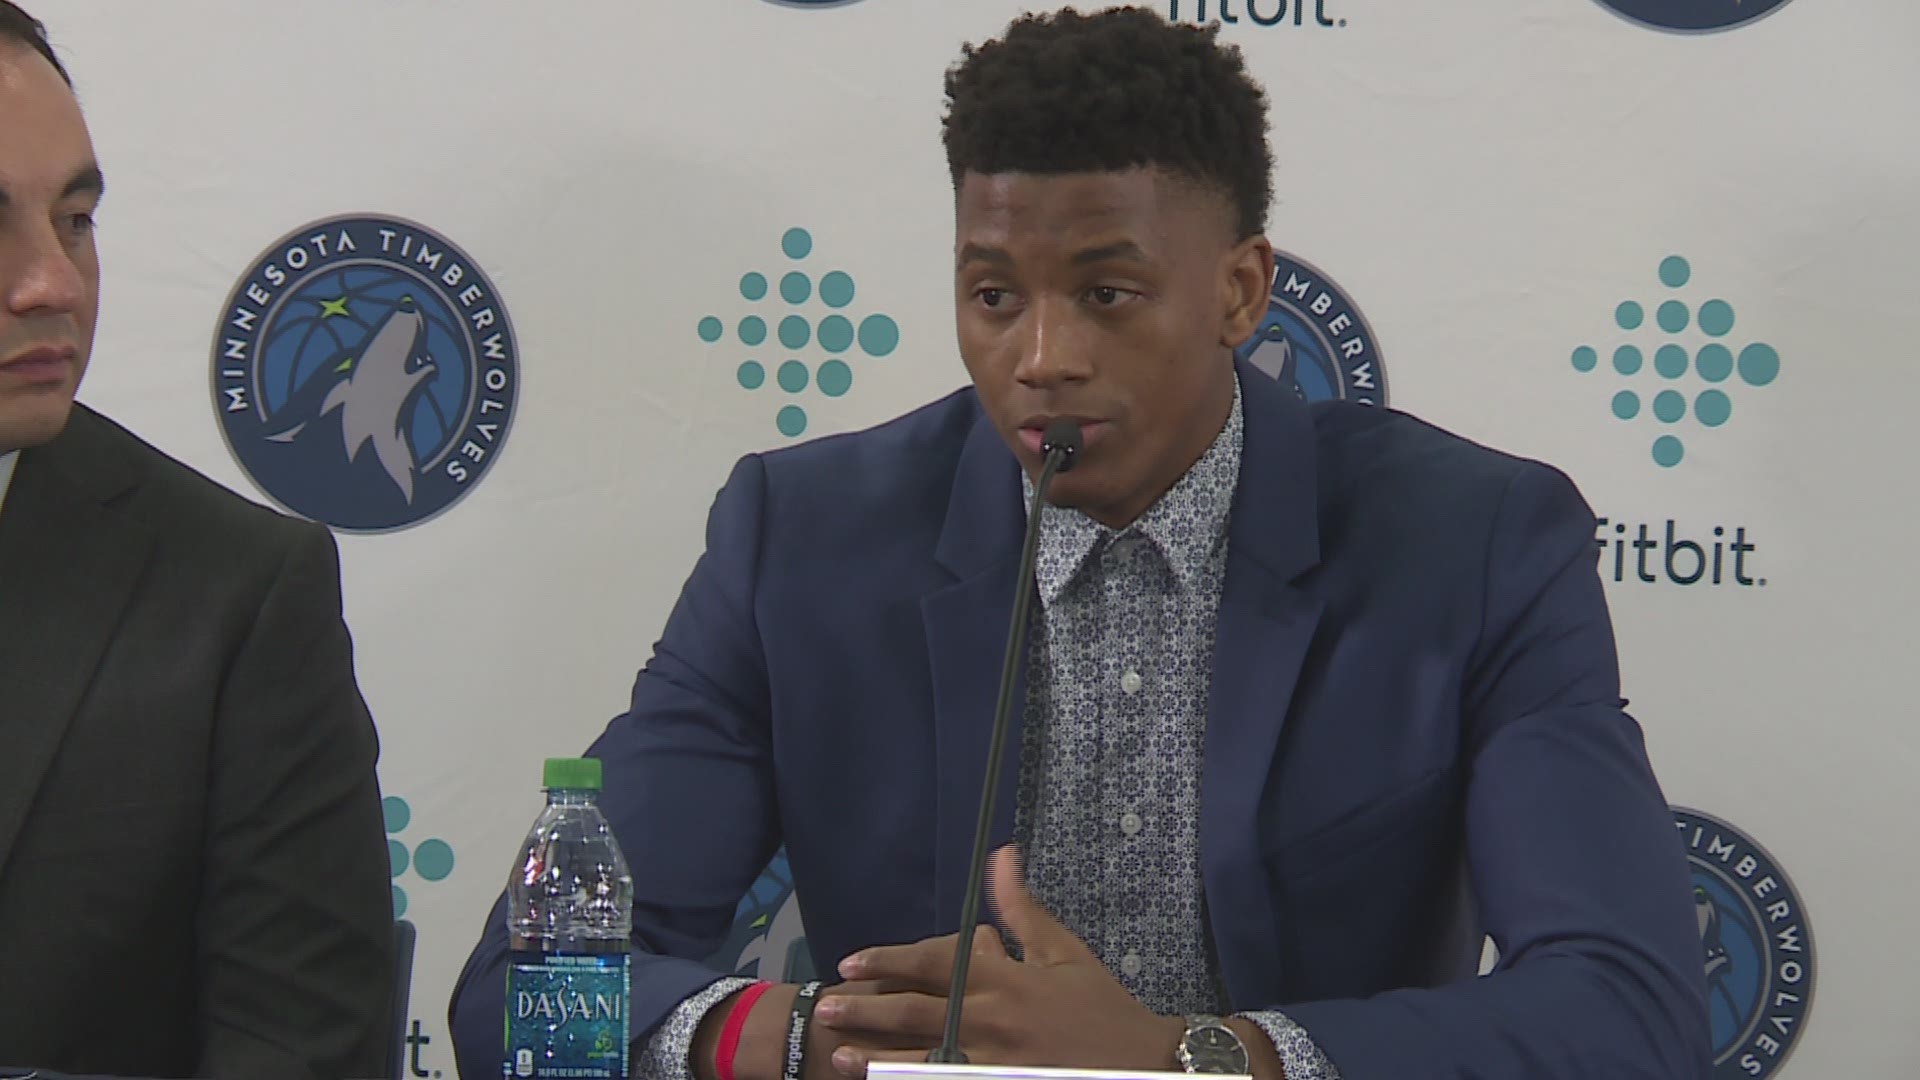 The Timberwolves introduced top-pick Jarrett Culver and their two other rookies on Thursday.